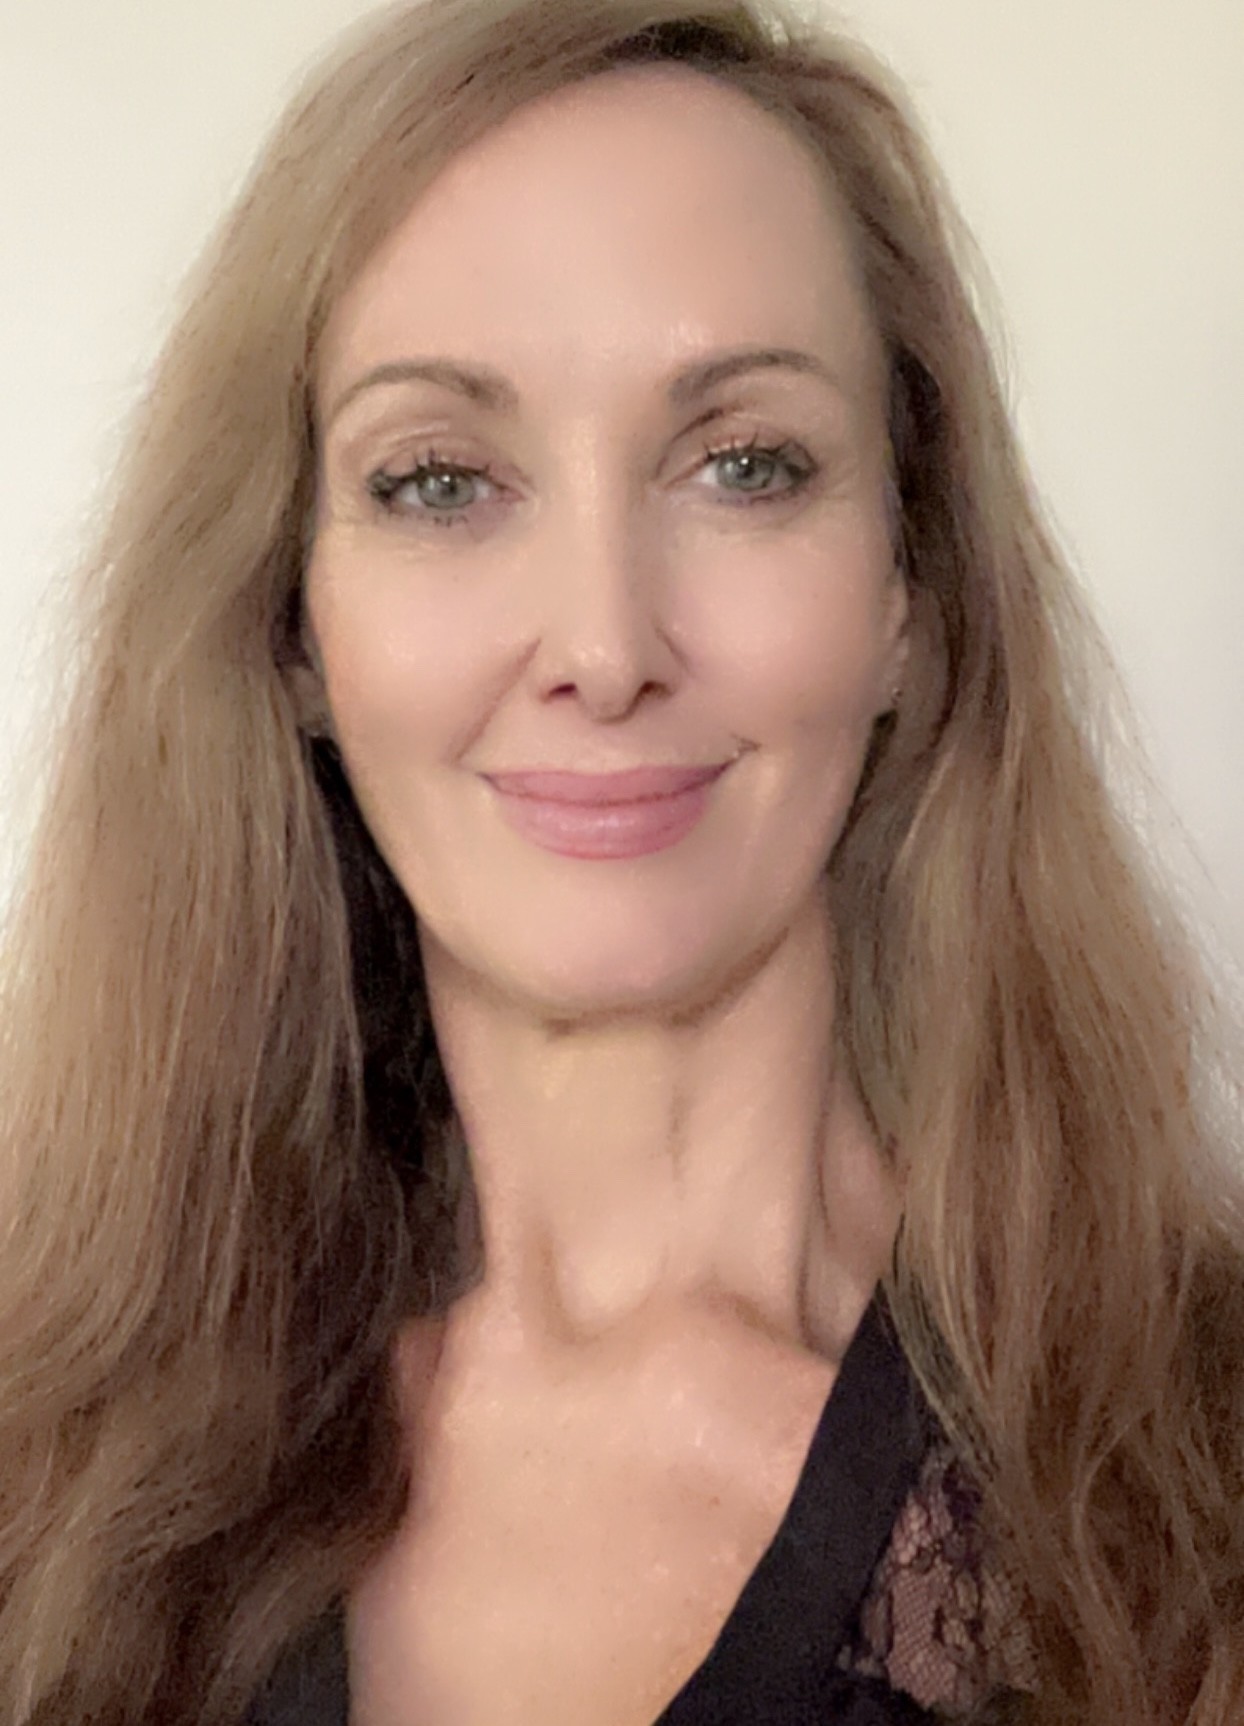 Chloe Manier is an online counsellor and Reiki healer based in Queensland, Australia.